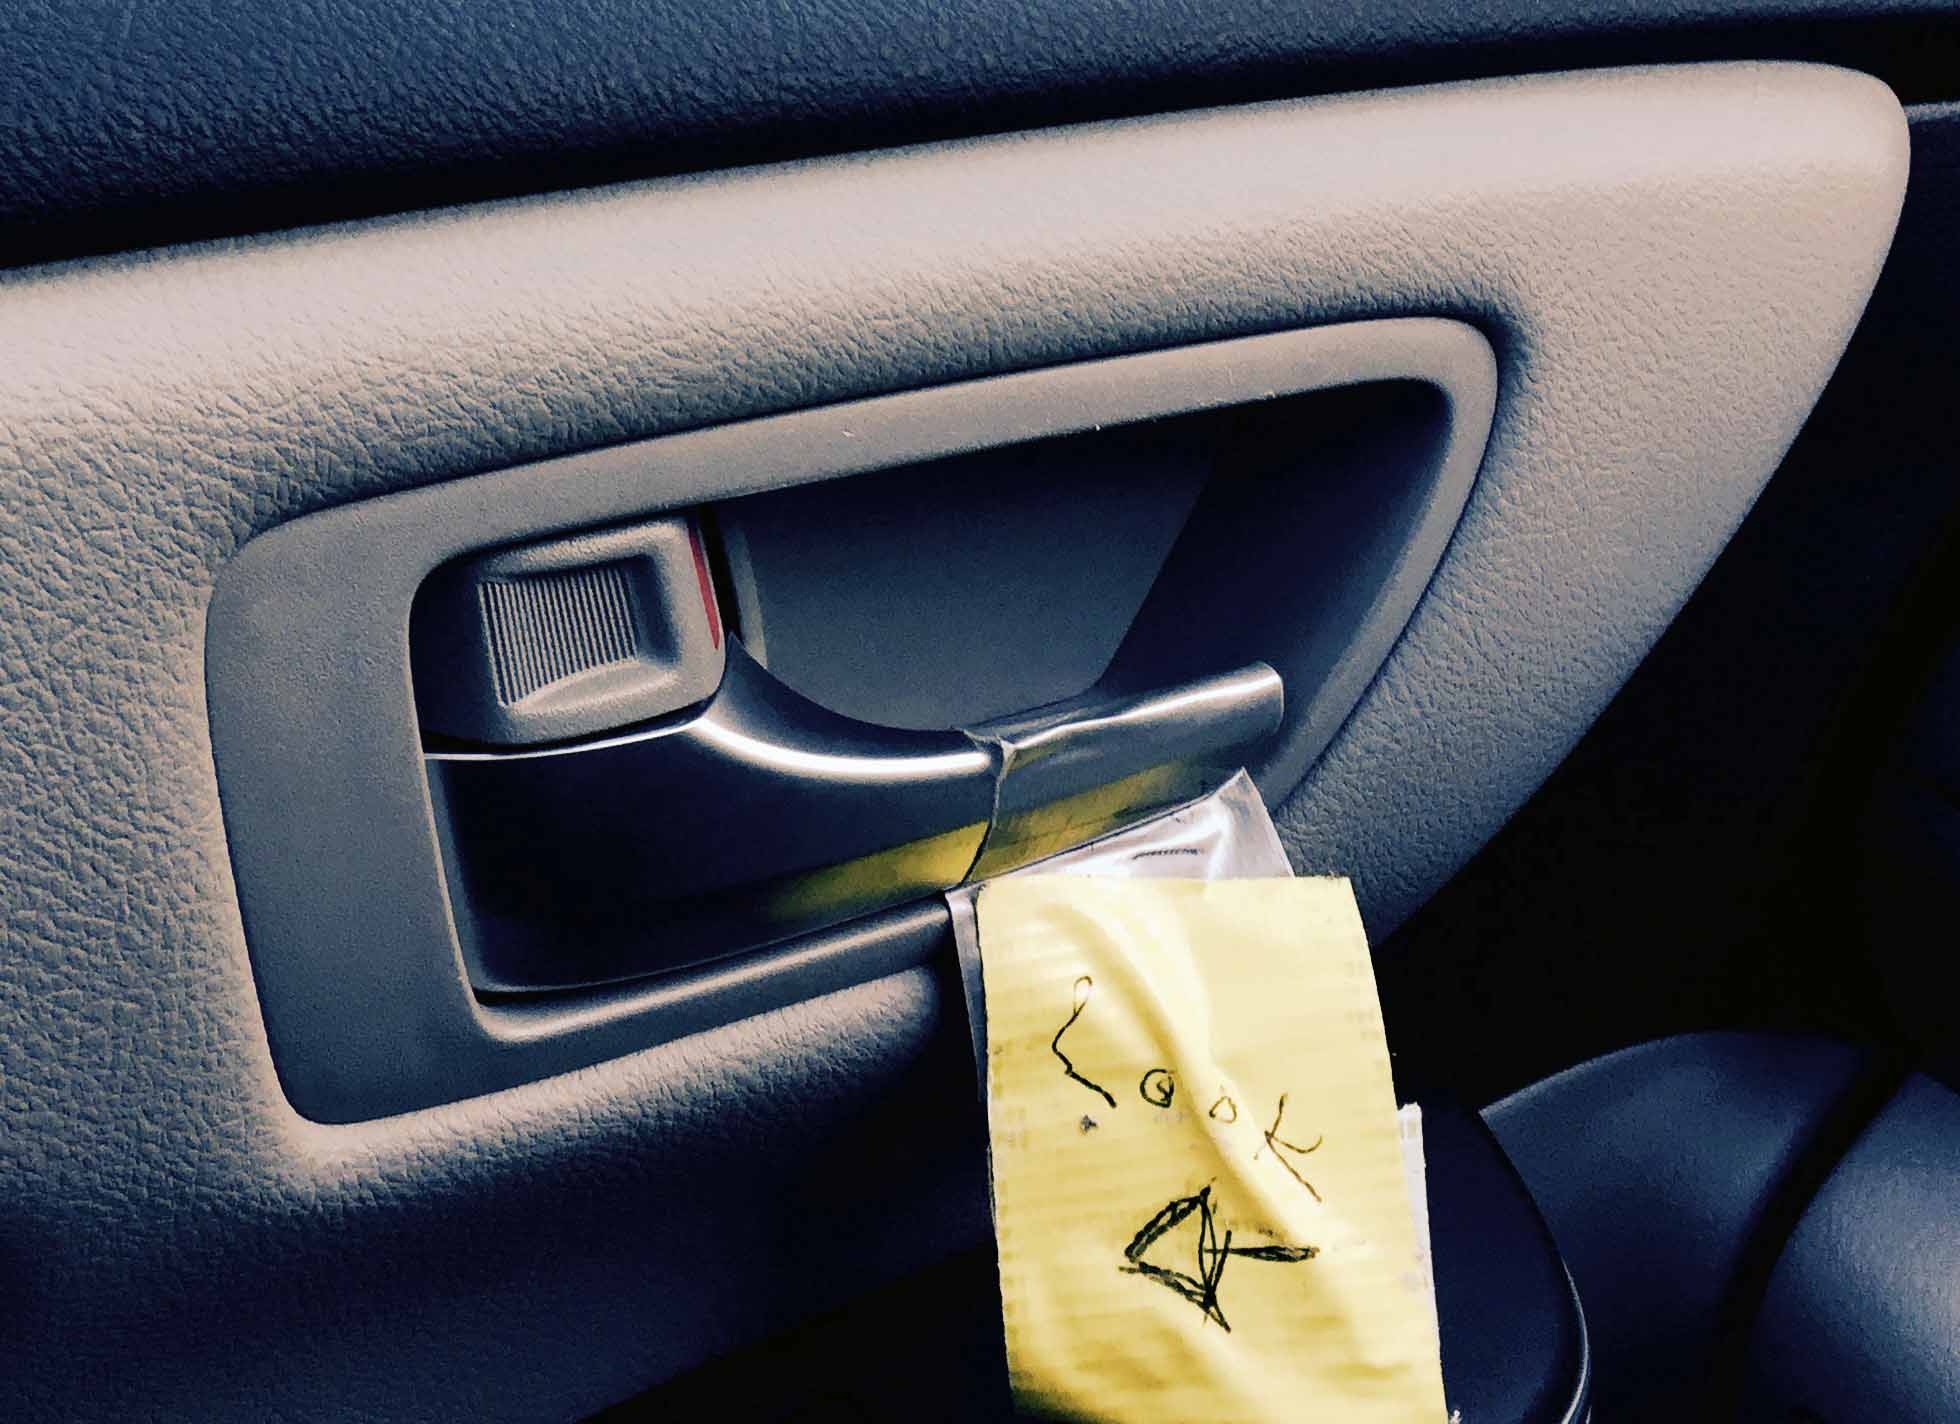 A note is taped next to car door latch with arrow pointing to latch & word "Look" printed on it. Note is to remind driver or passenger to use the safer far hand Dutch Reach method to exit vehicle to avoid dooring a cyclist who might otherwise crash into or hit the door were it suddenly opened.